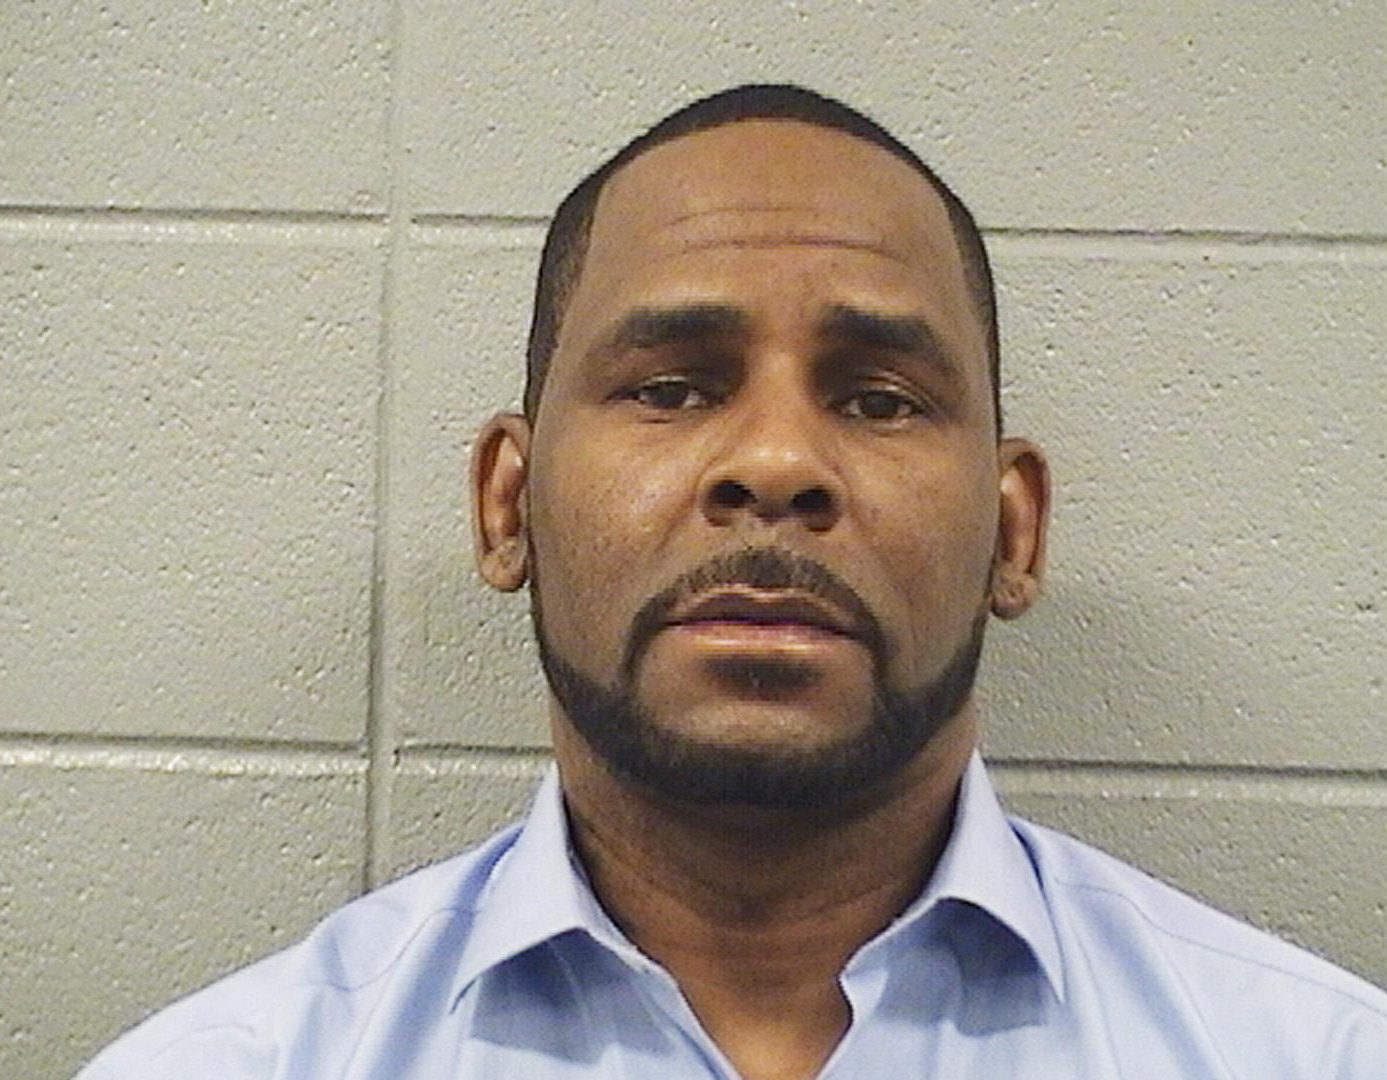 R. Kelly Vows to Wear GPS, Stay Away From Minors if Released